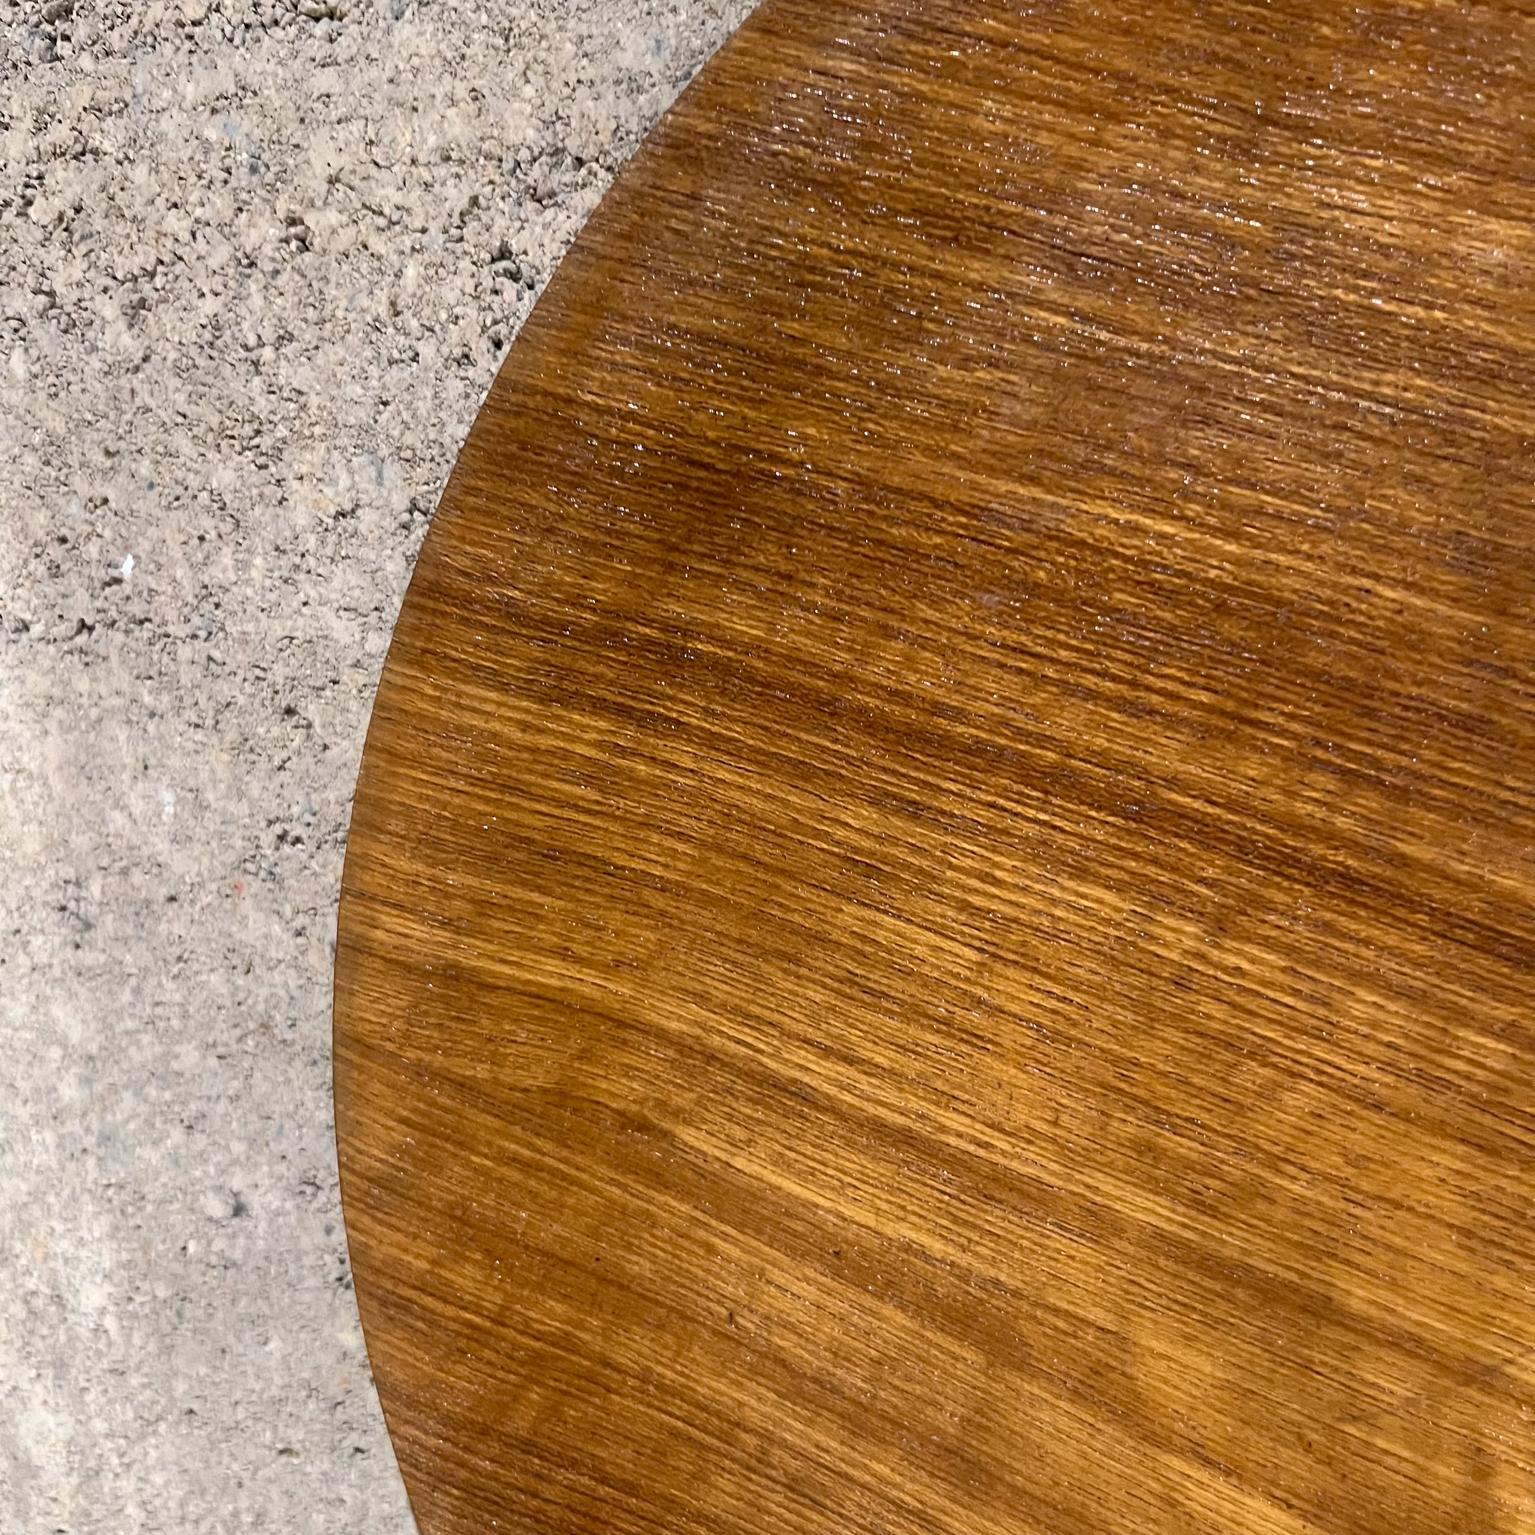 1970s Modernist Round Teak Wood Plate In Good Condition For Sale In Chula Vista, CA